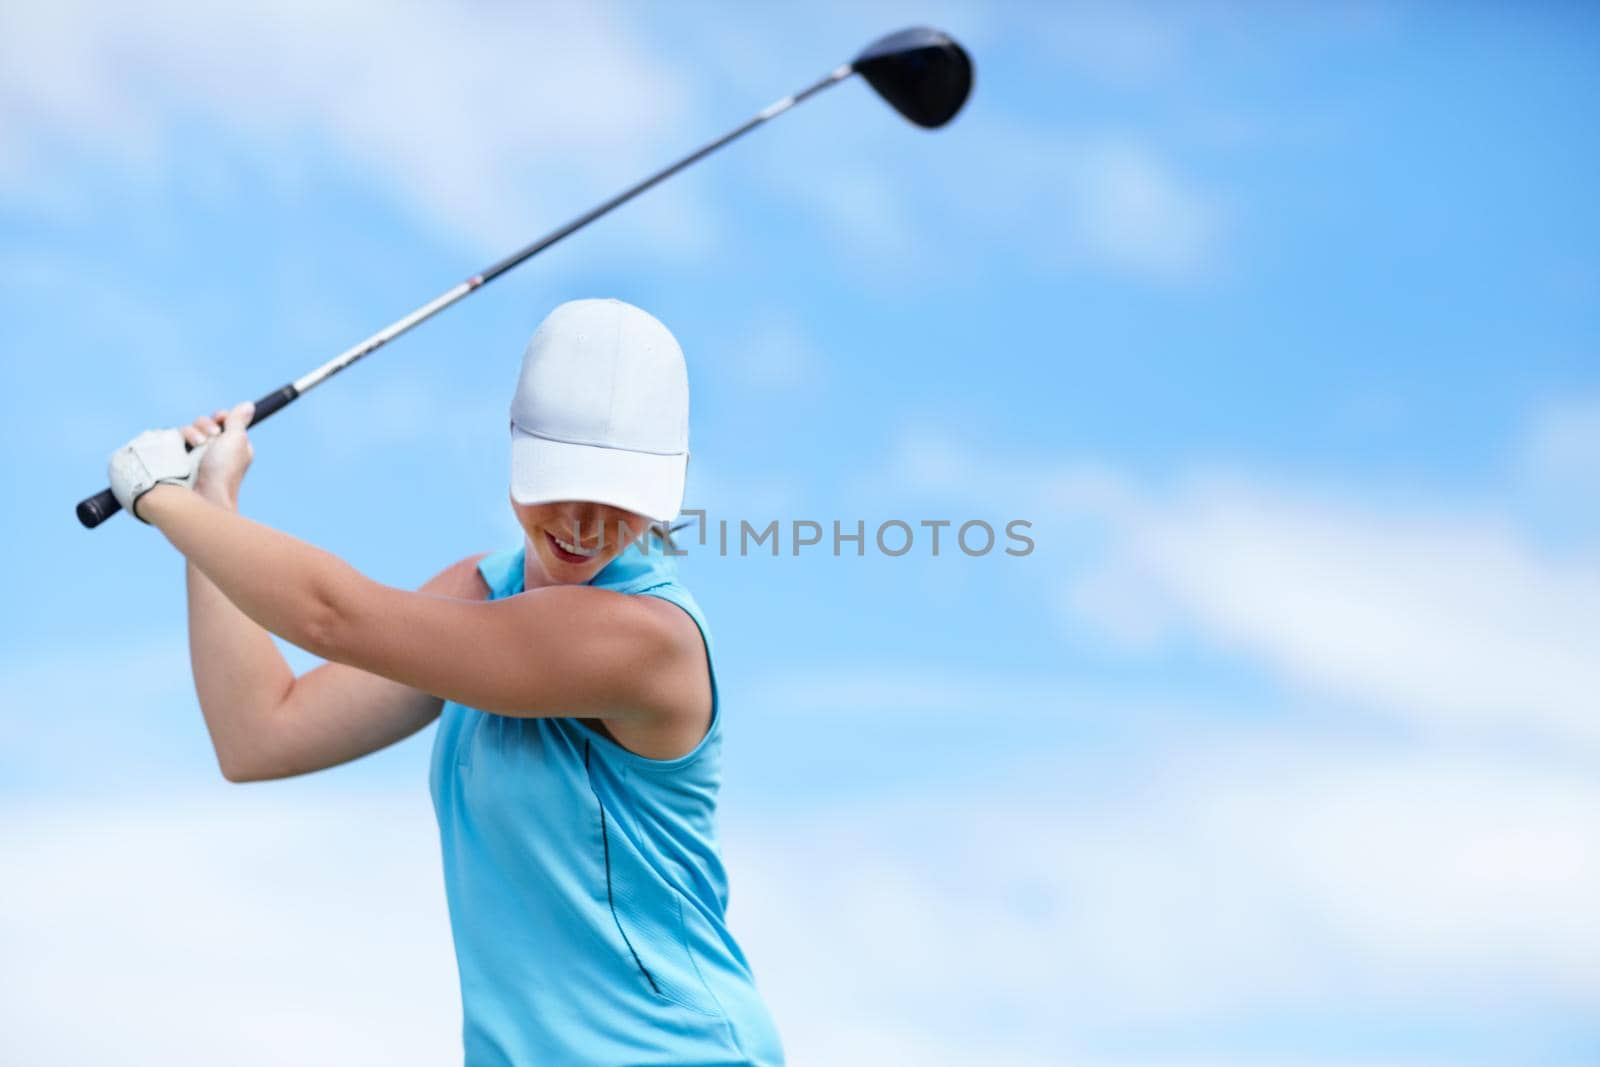 A young female golfer swinging a golf club (driver) over her head about to take a shot - copyspace.